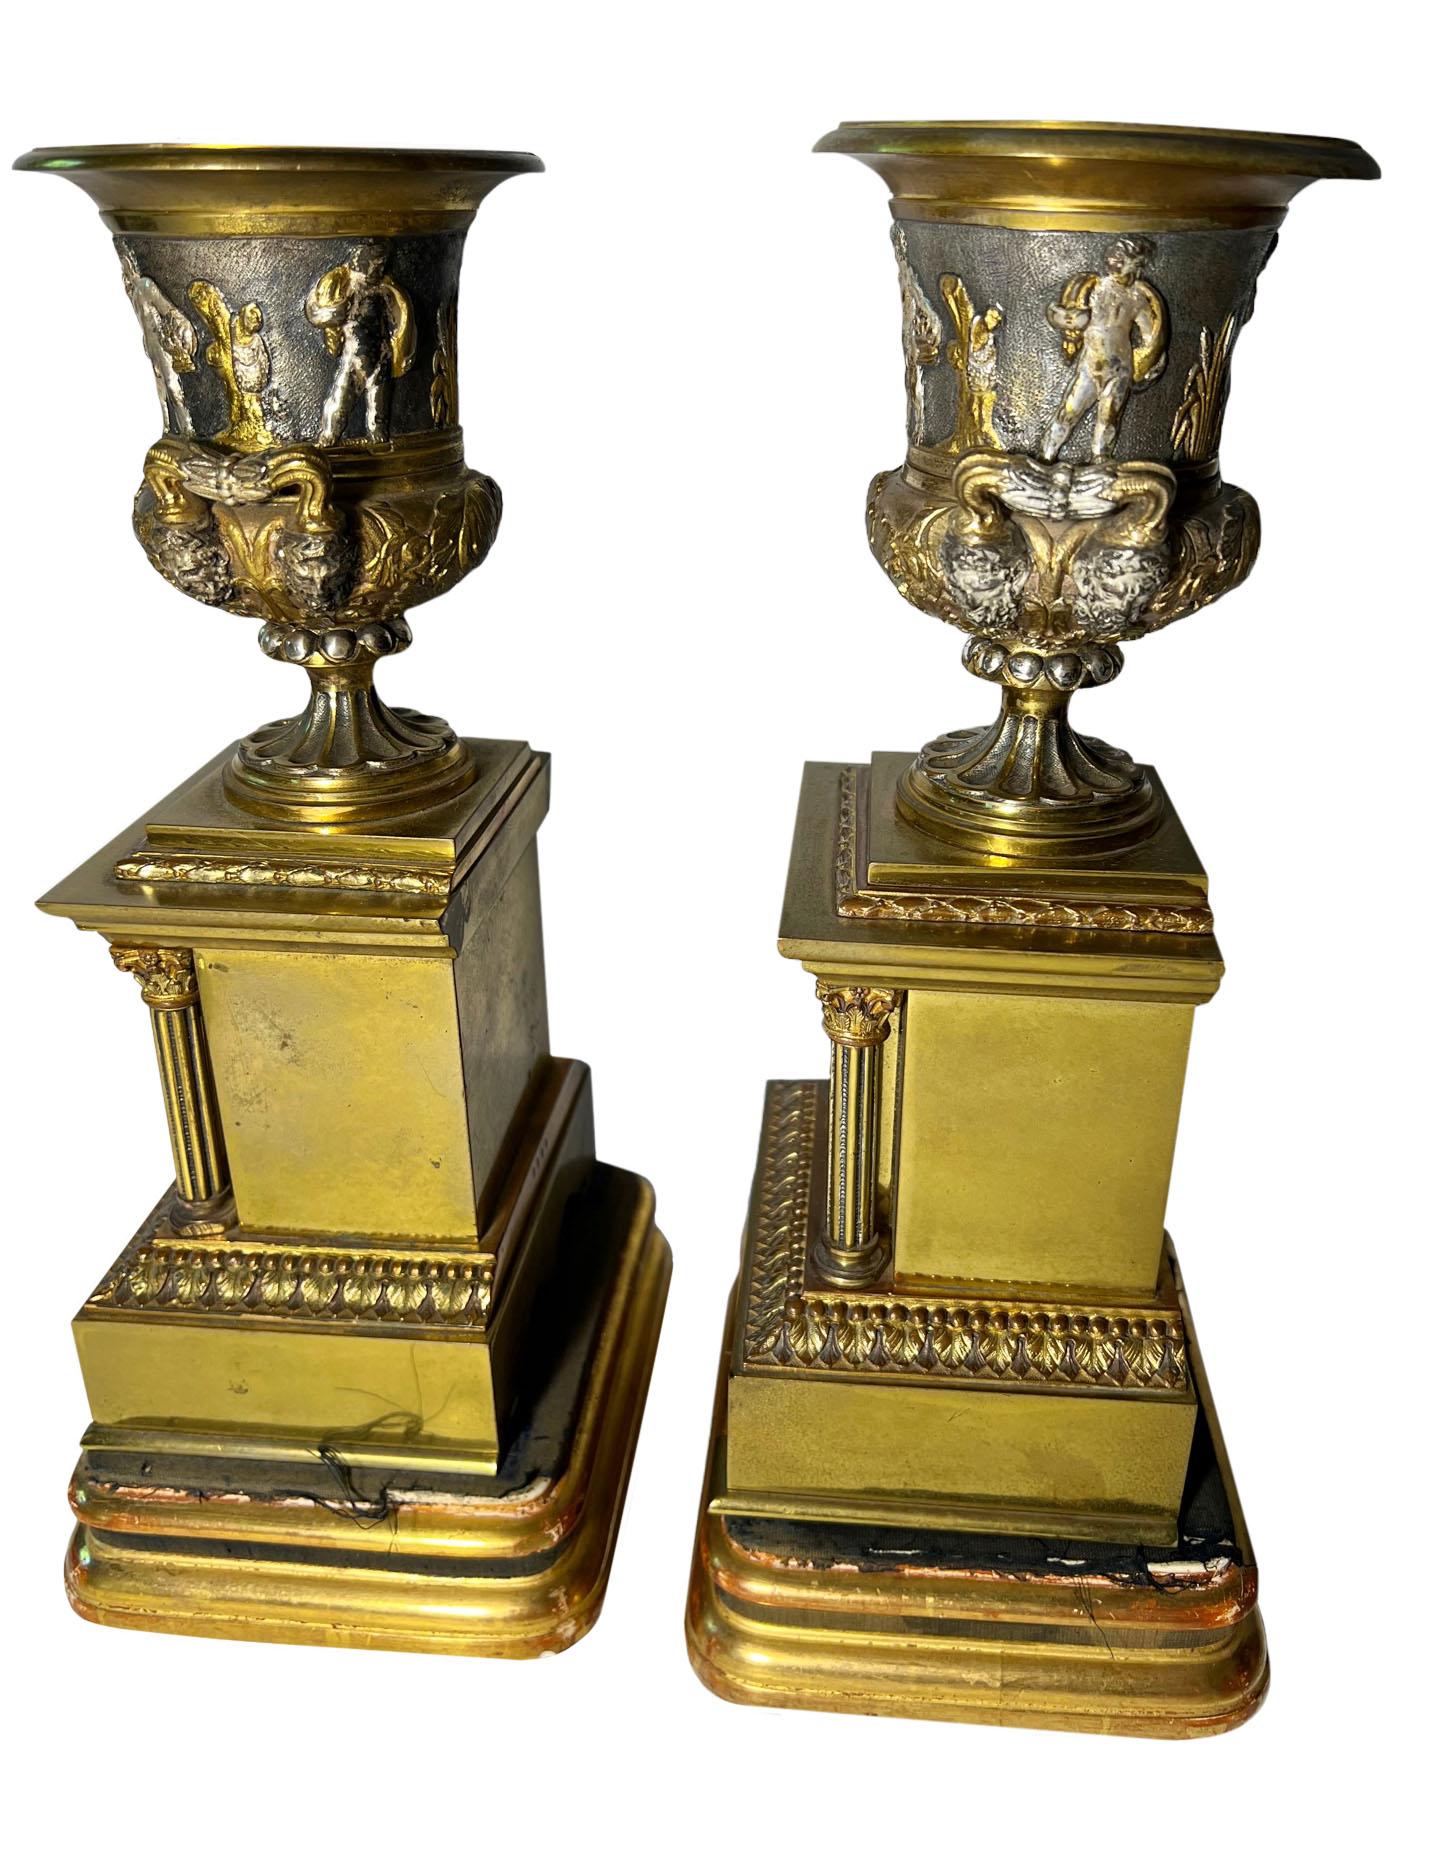 A pair of bronze dore urns mounted on wood stands with columns. Each urn surrounded with life of the Romans in a silver overlay with bronze figures. Exceptional quality work. Italy, circa 1880s.